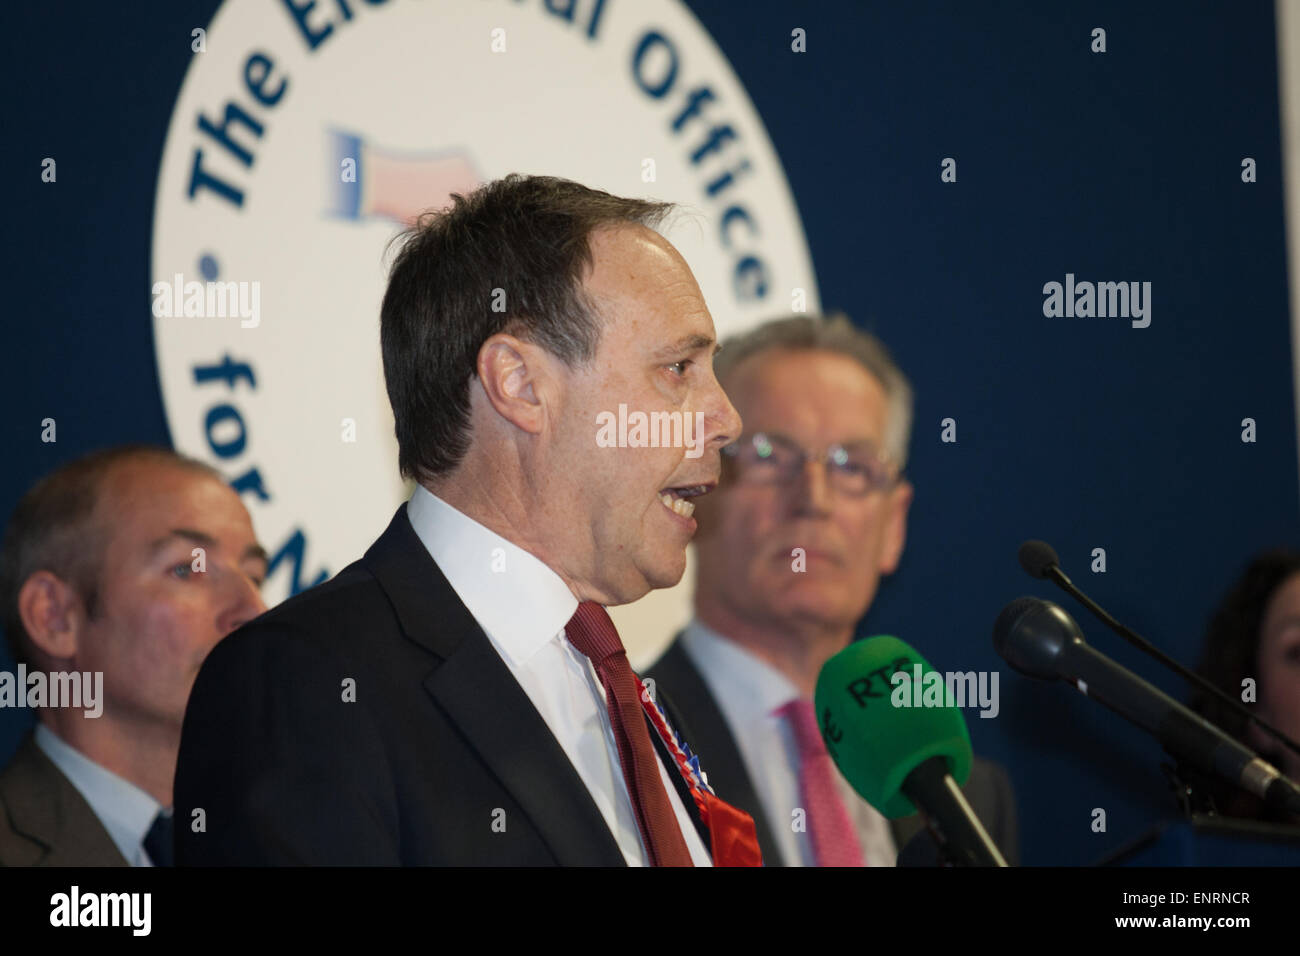 Belfast UK. 7th May 2015 General Election:  DUP Nigel Dodds (Gerry Kelly Sinn Fein in background) gives his acceptance speech Stock Photo